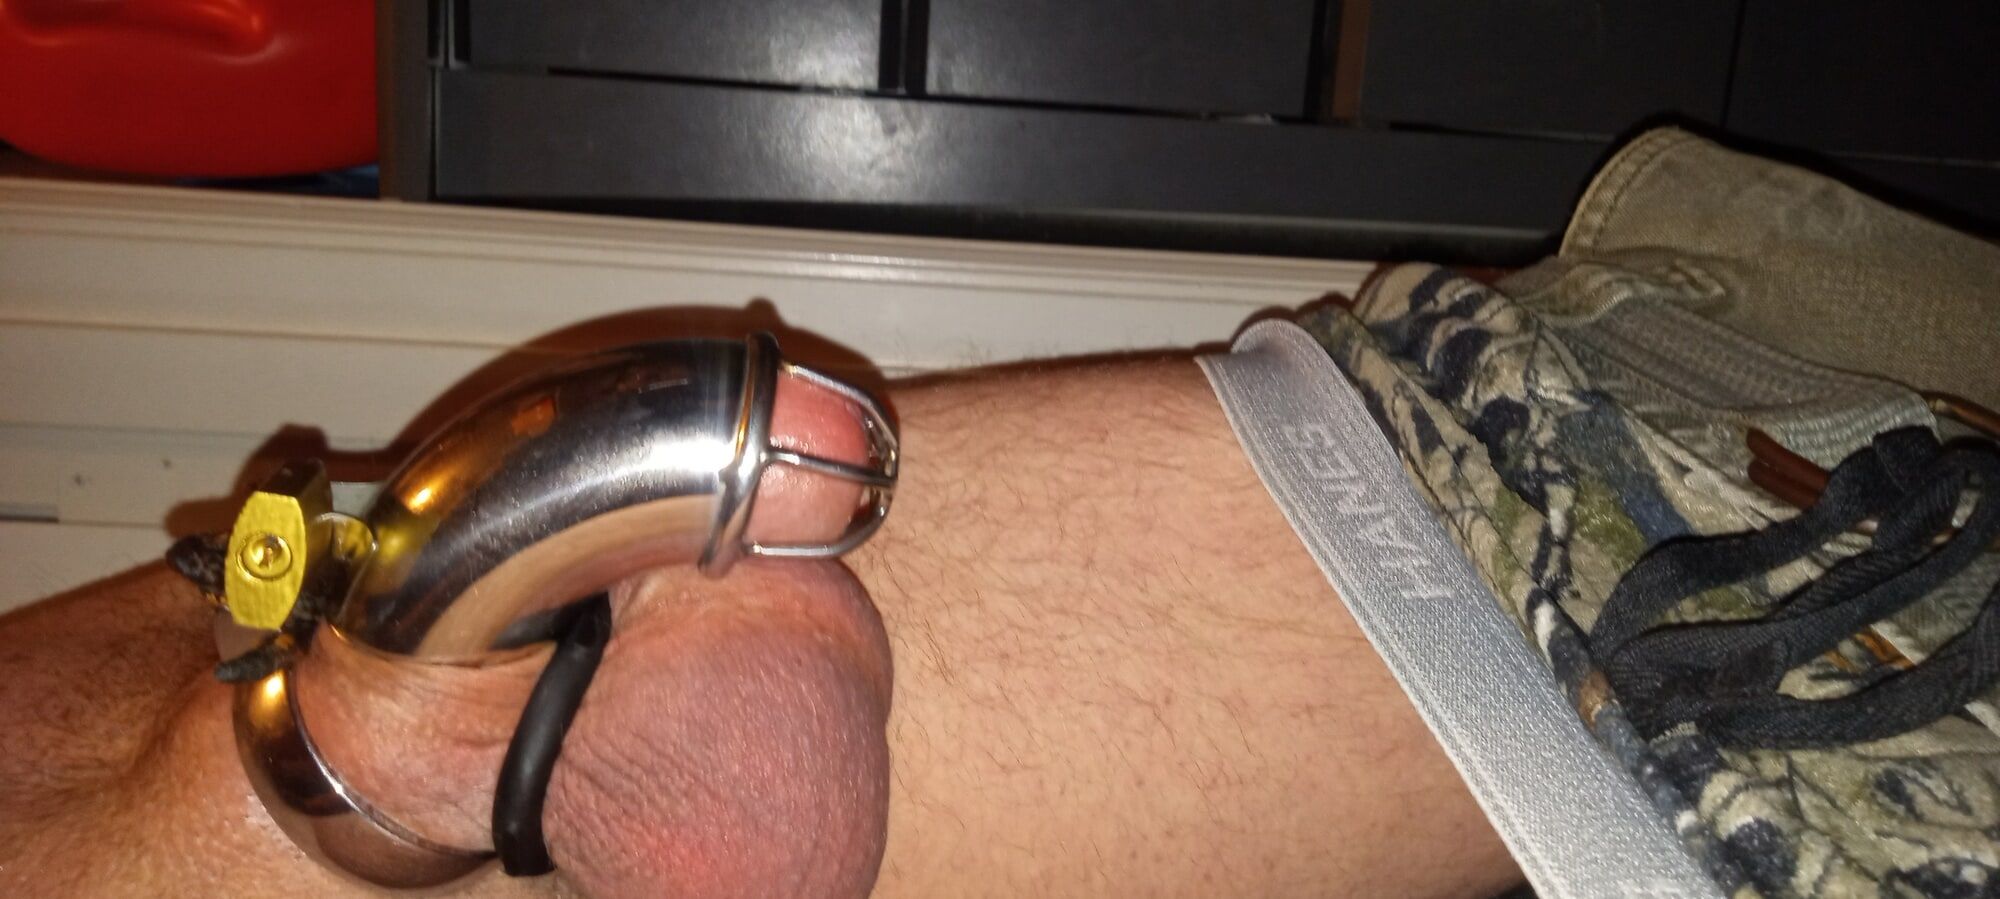 Chastity cage small cock sissy #2